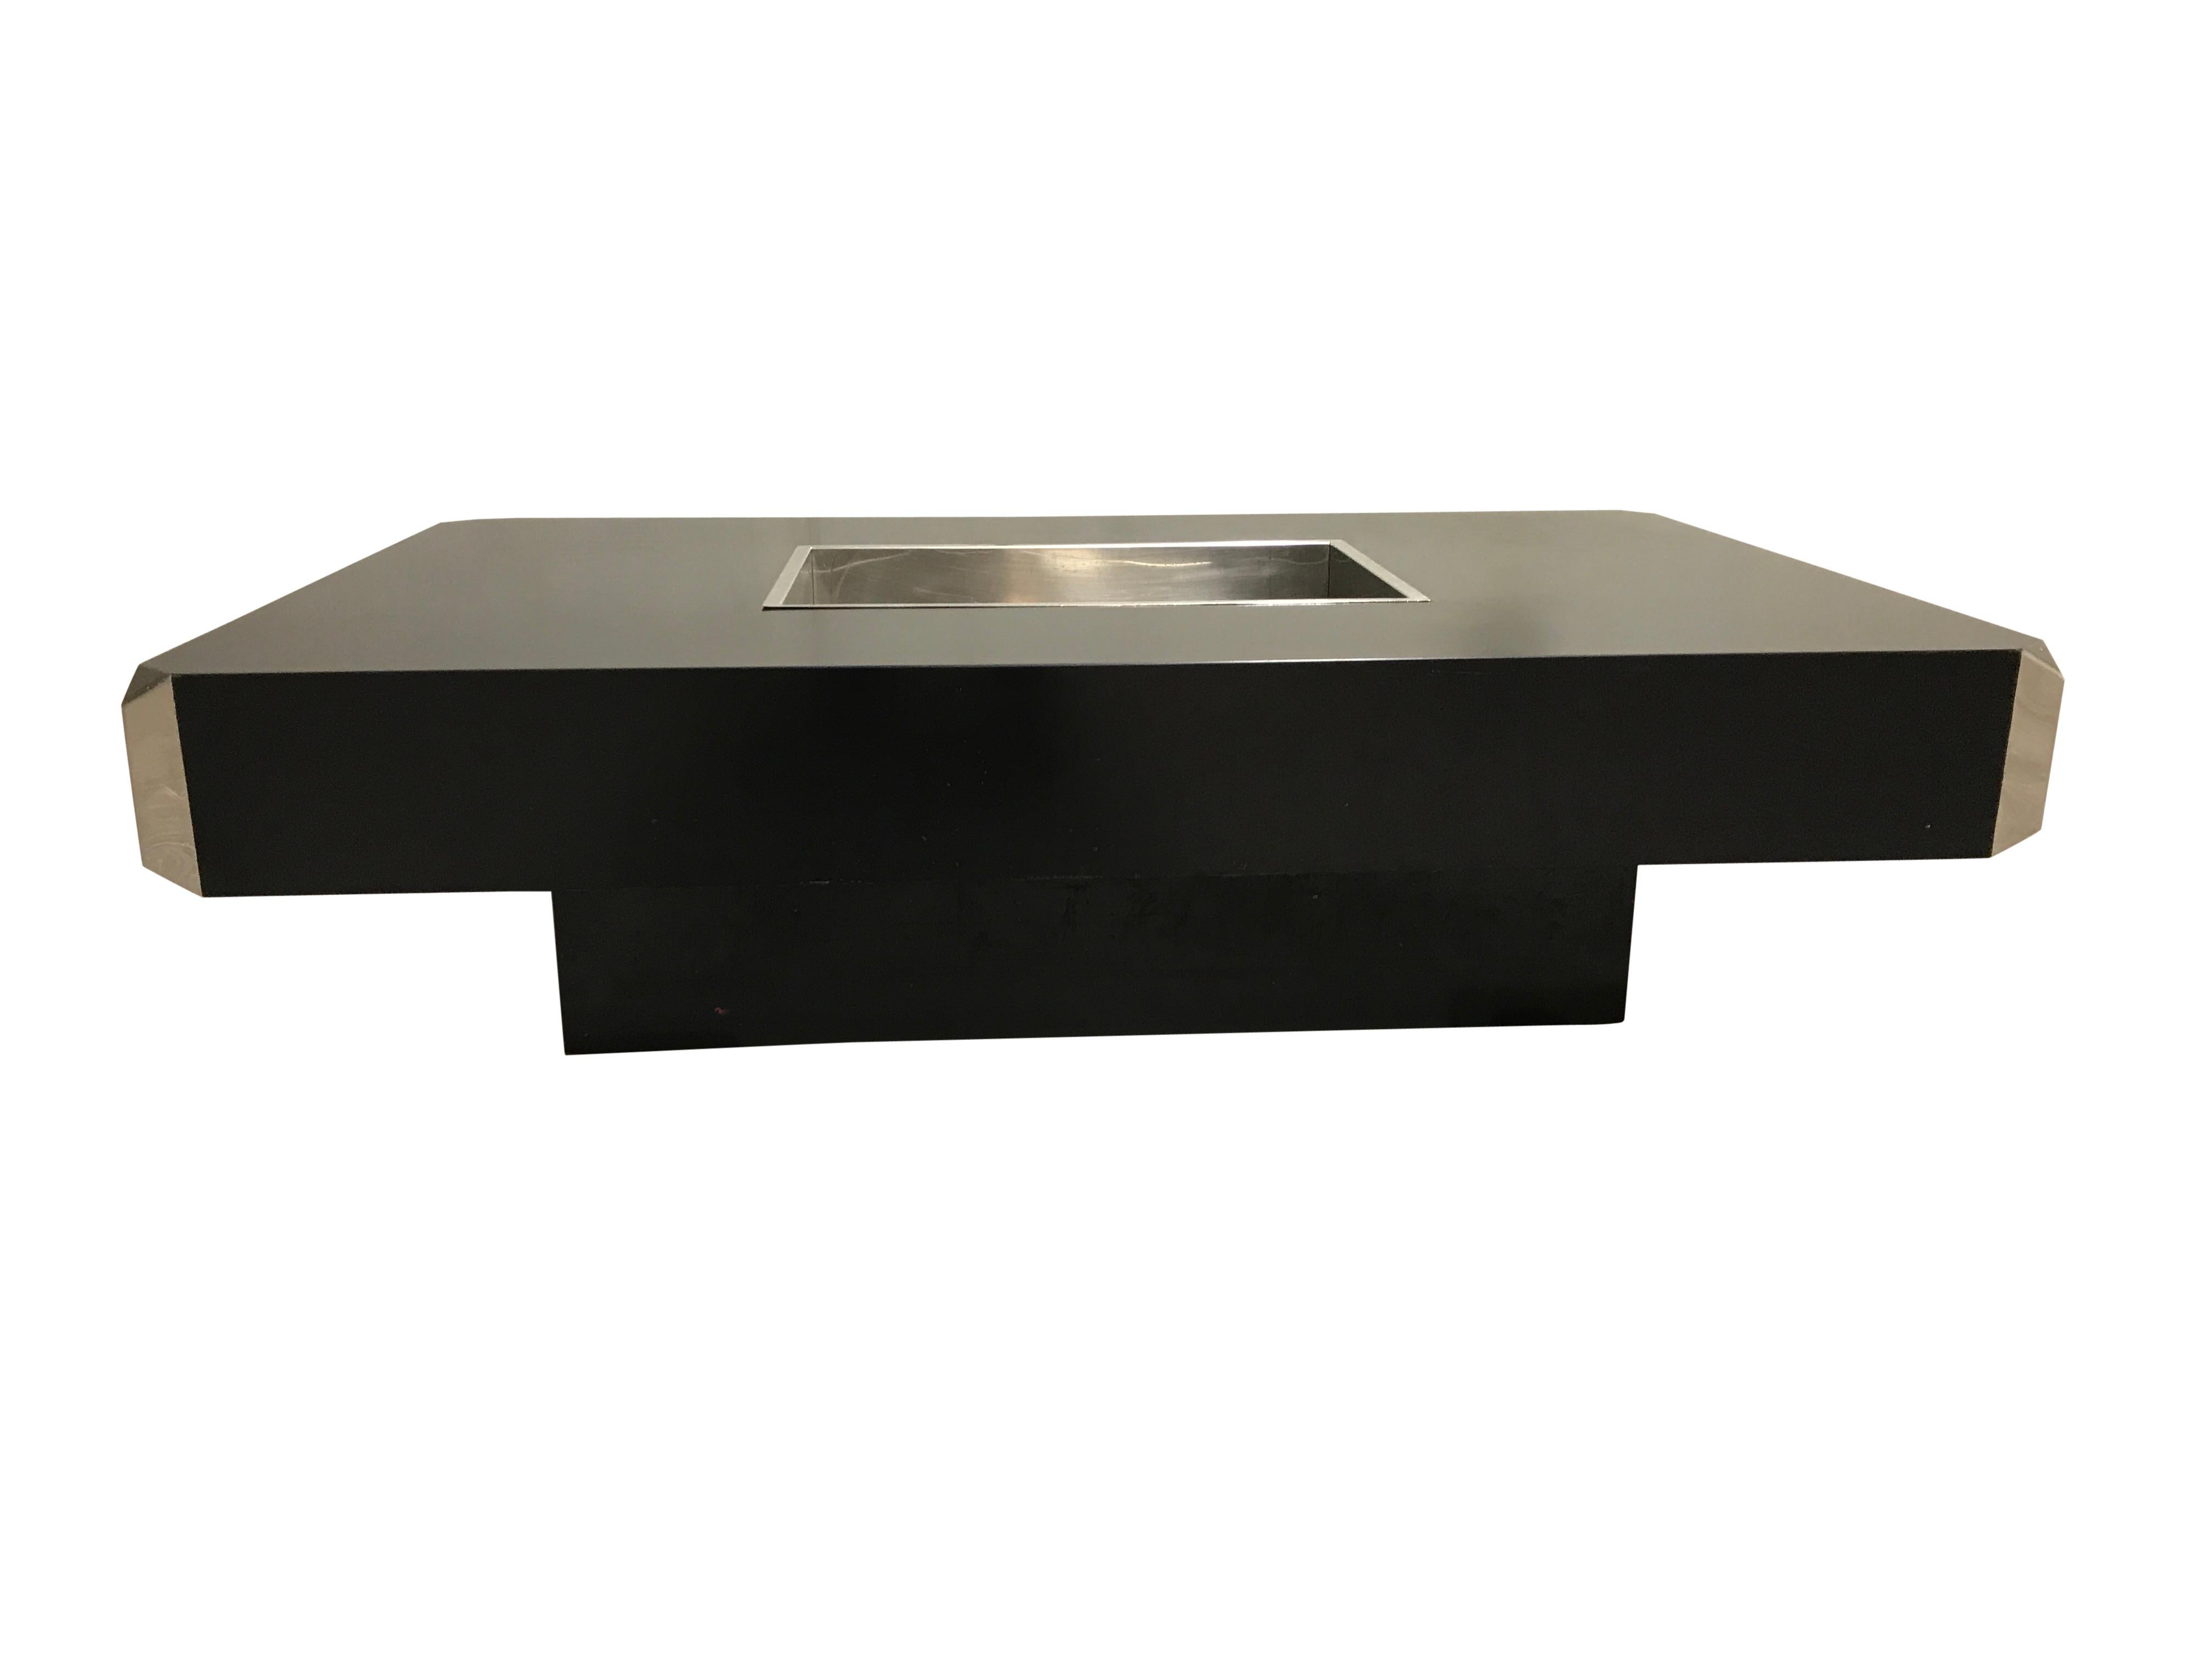 Luxurious bar coffee table made from black lacquered wood designed by Willy Rizzo.

The table is in good condition with very minor user traces.

This table fits well in today's interiors thanks to its luxurious and timeless appeal.

1970s,